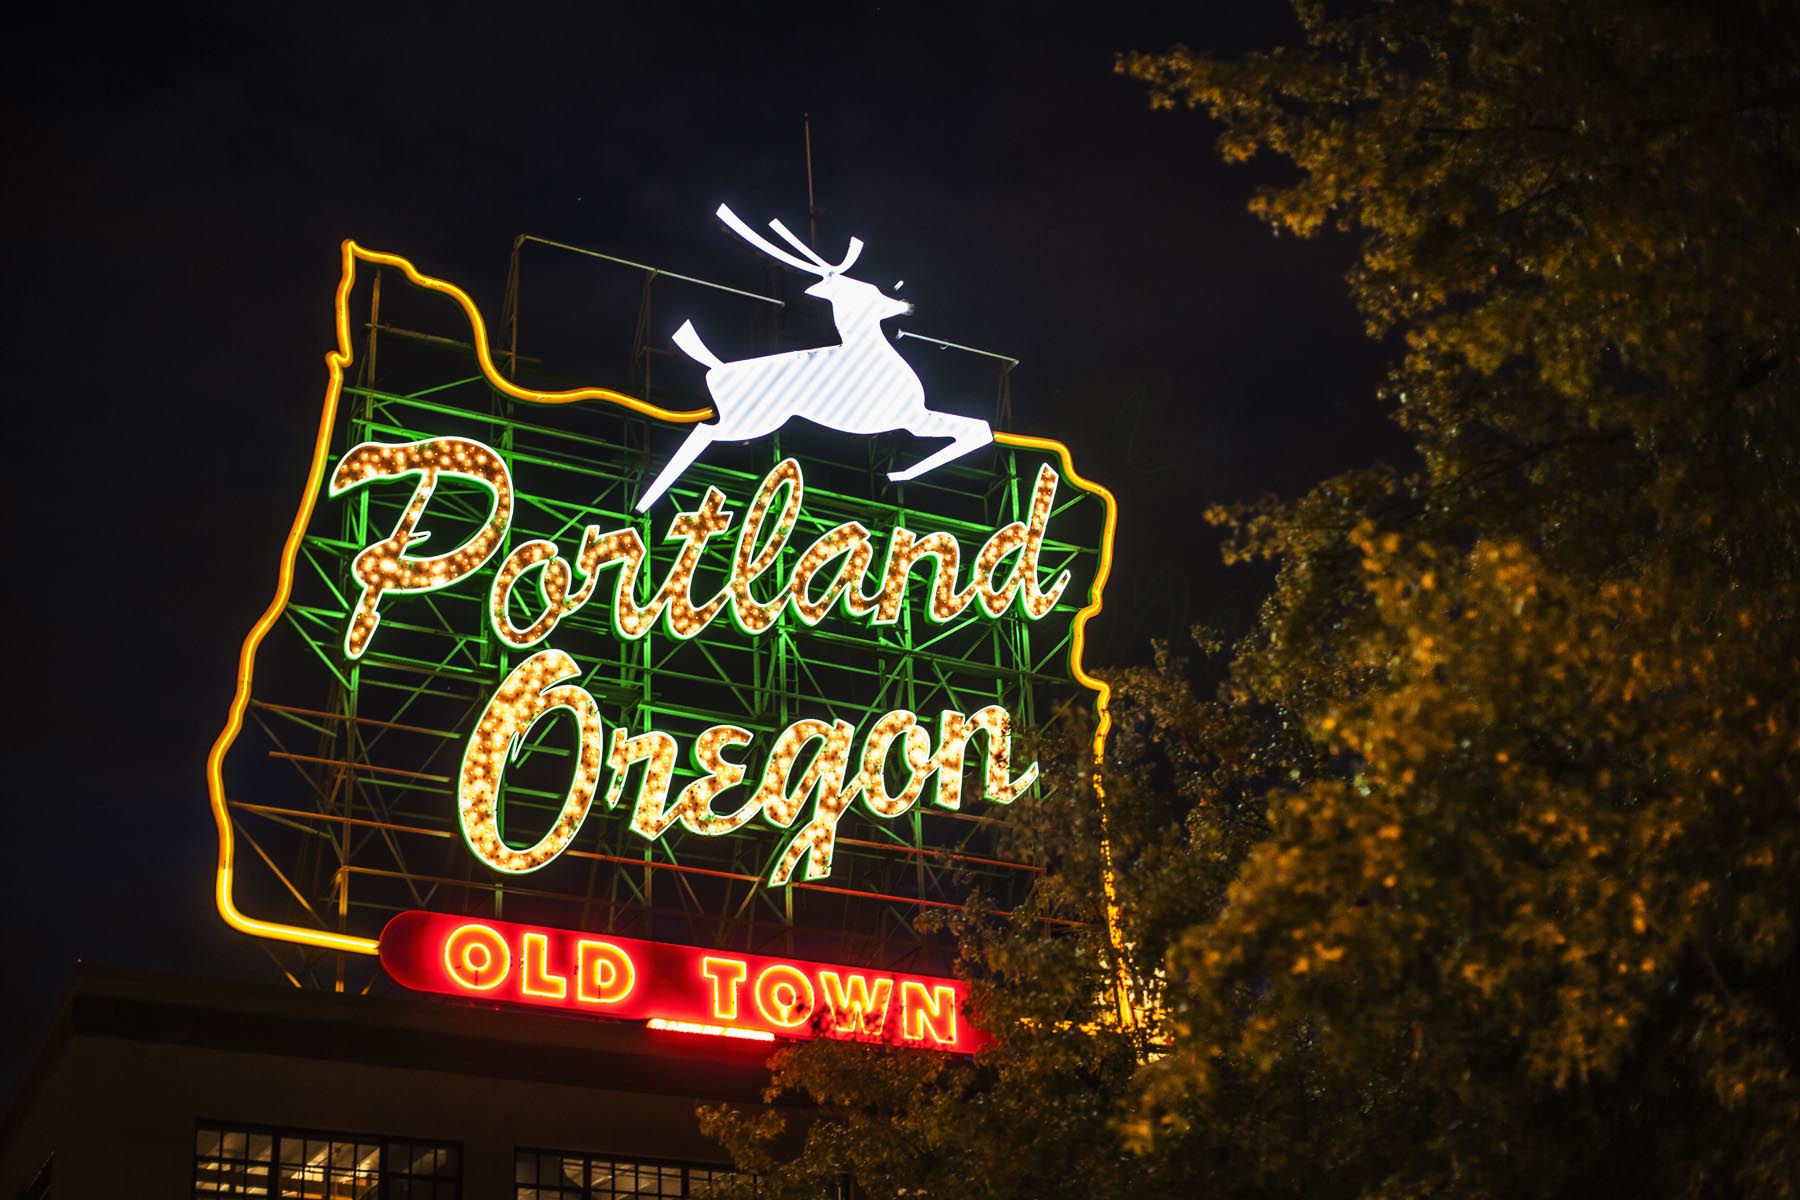 Neon sign for Old Town, Portland, Oregon, US